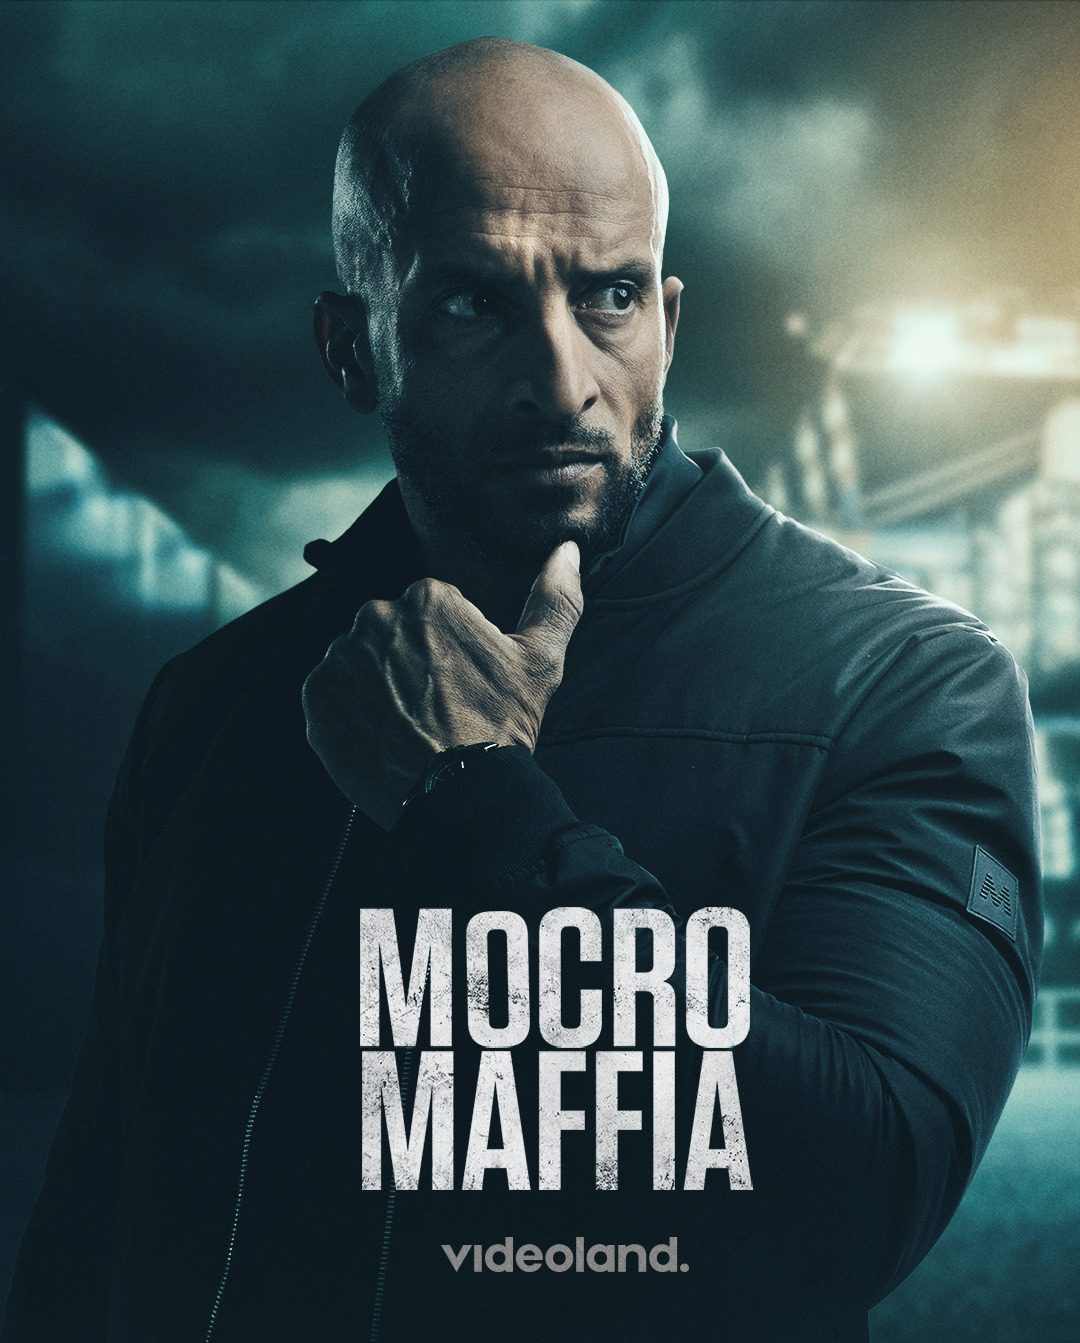 Extra Large TV Poster Image for Mocro maffia (#2 of 11)